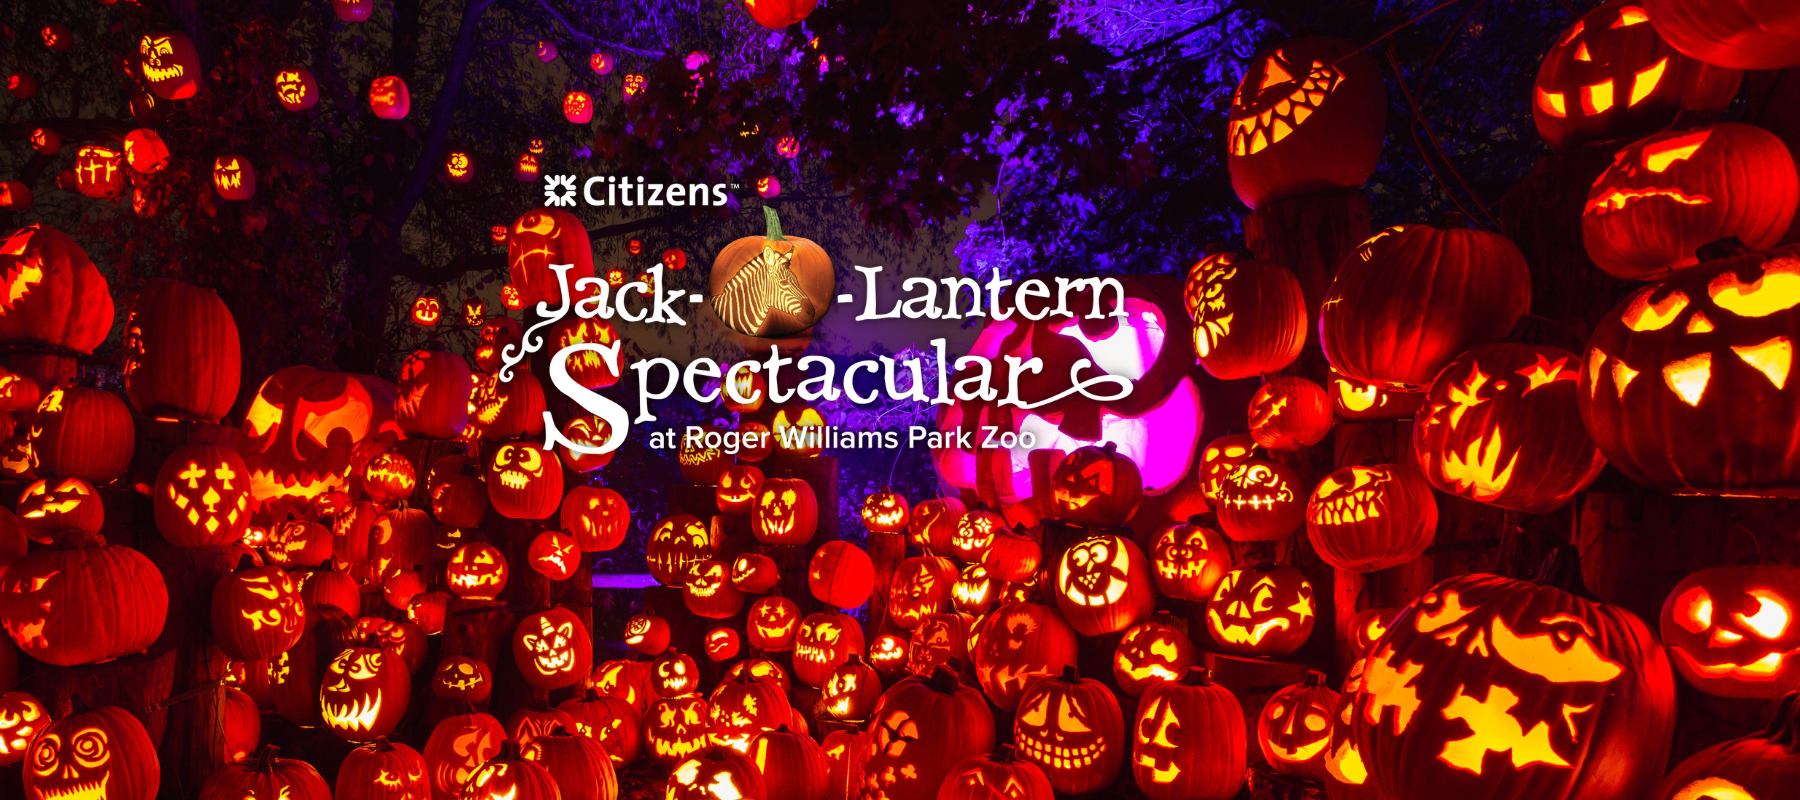 2022 Jack-O-Lantern Spectacular Banner with logo and large display of intricately carved pumpkins lit up.